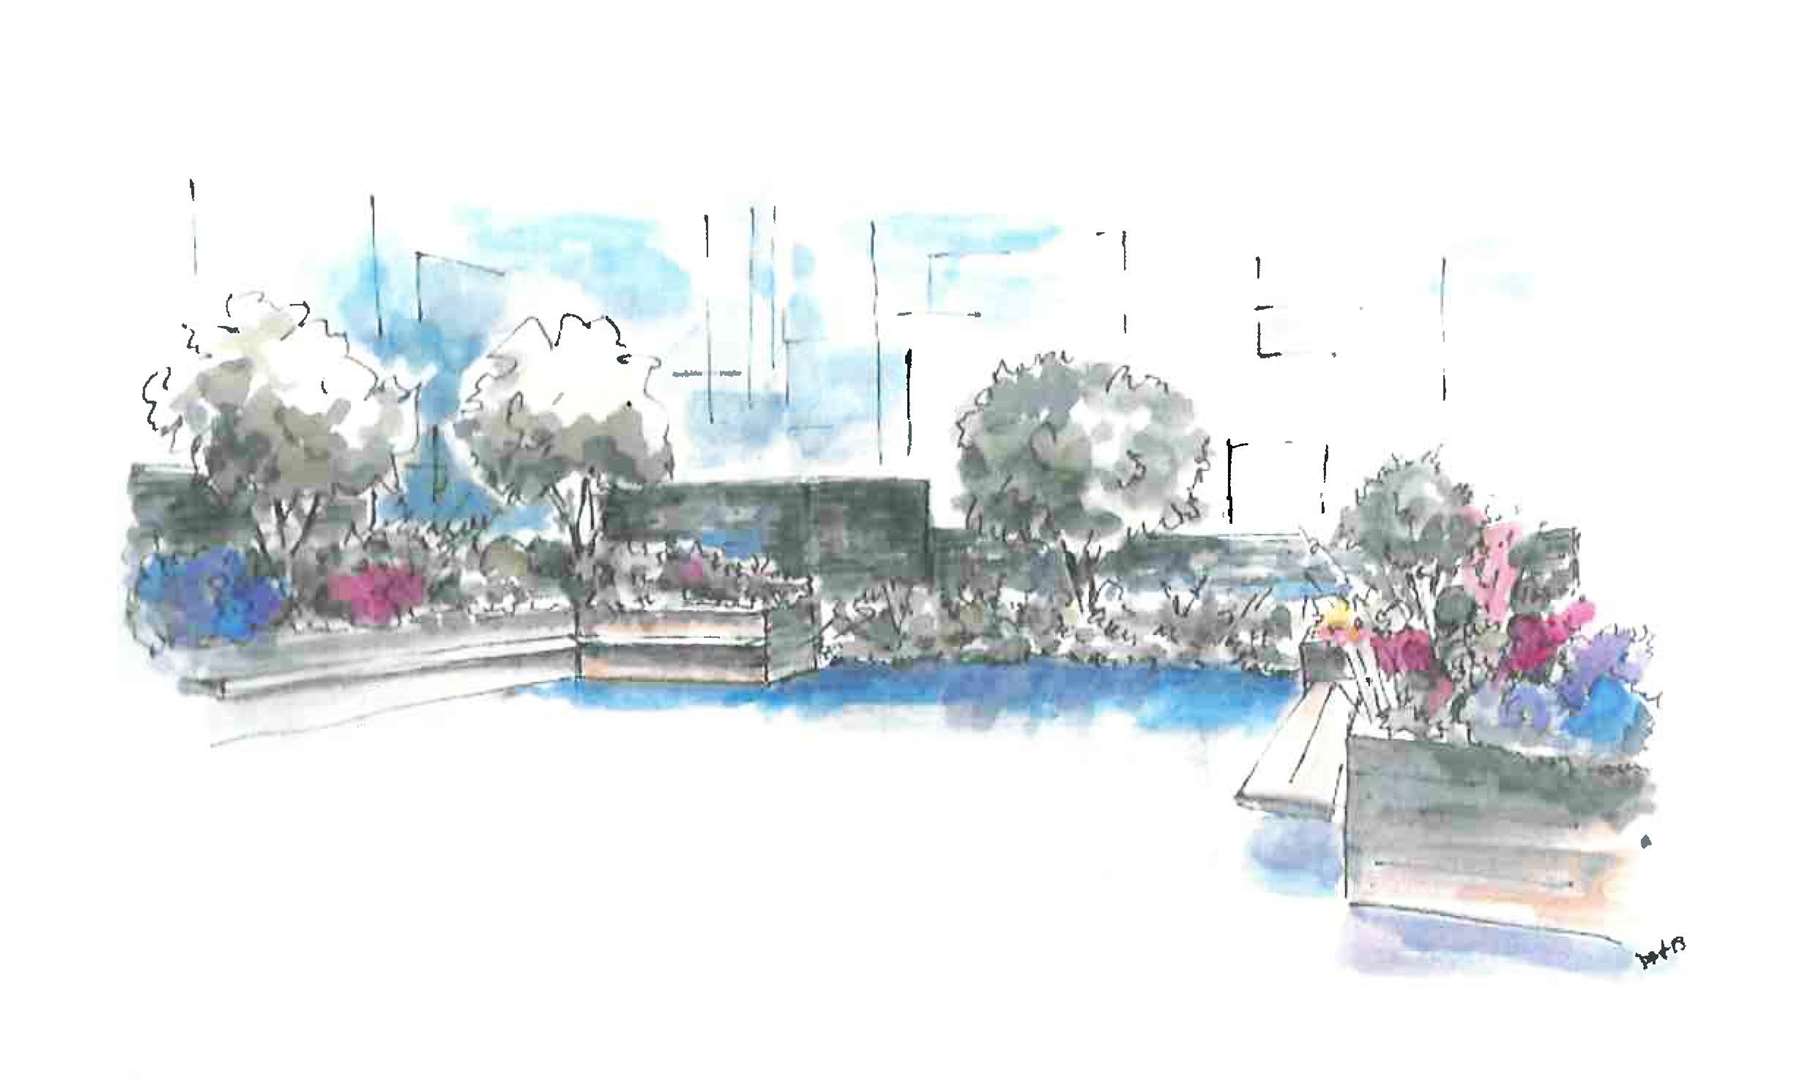 The project will feature landscaping and benches for patients and their visitors.